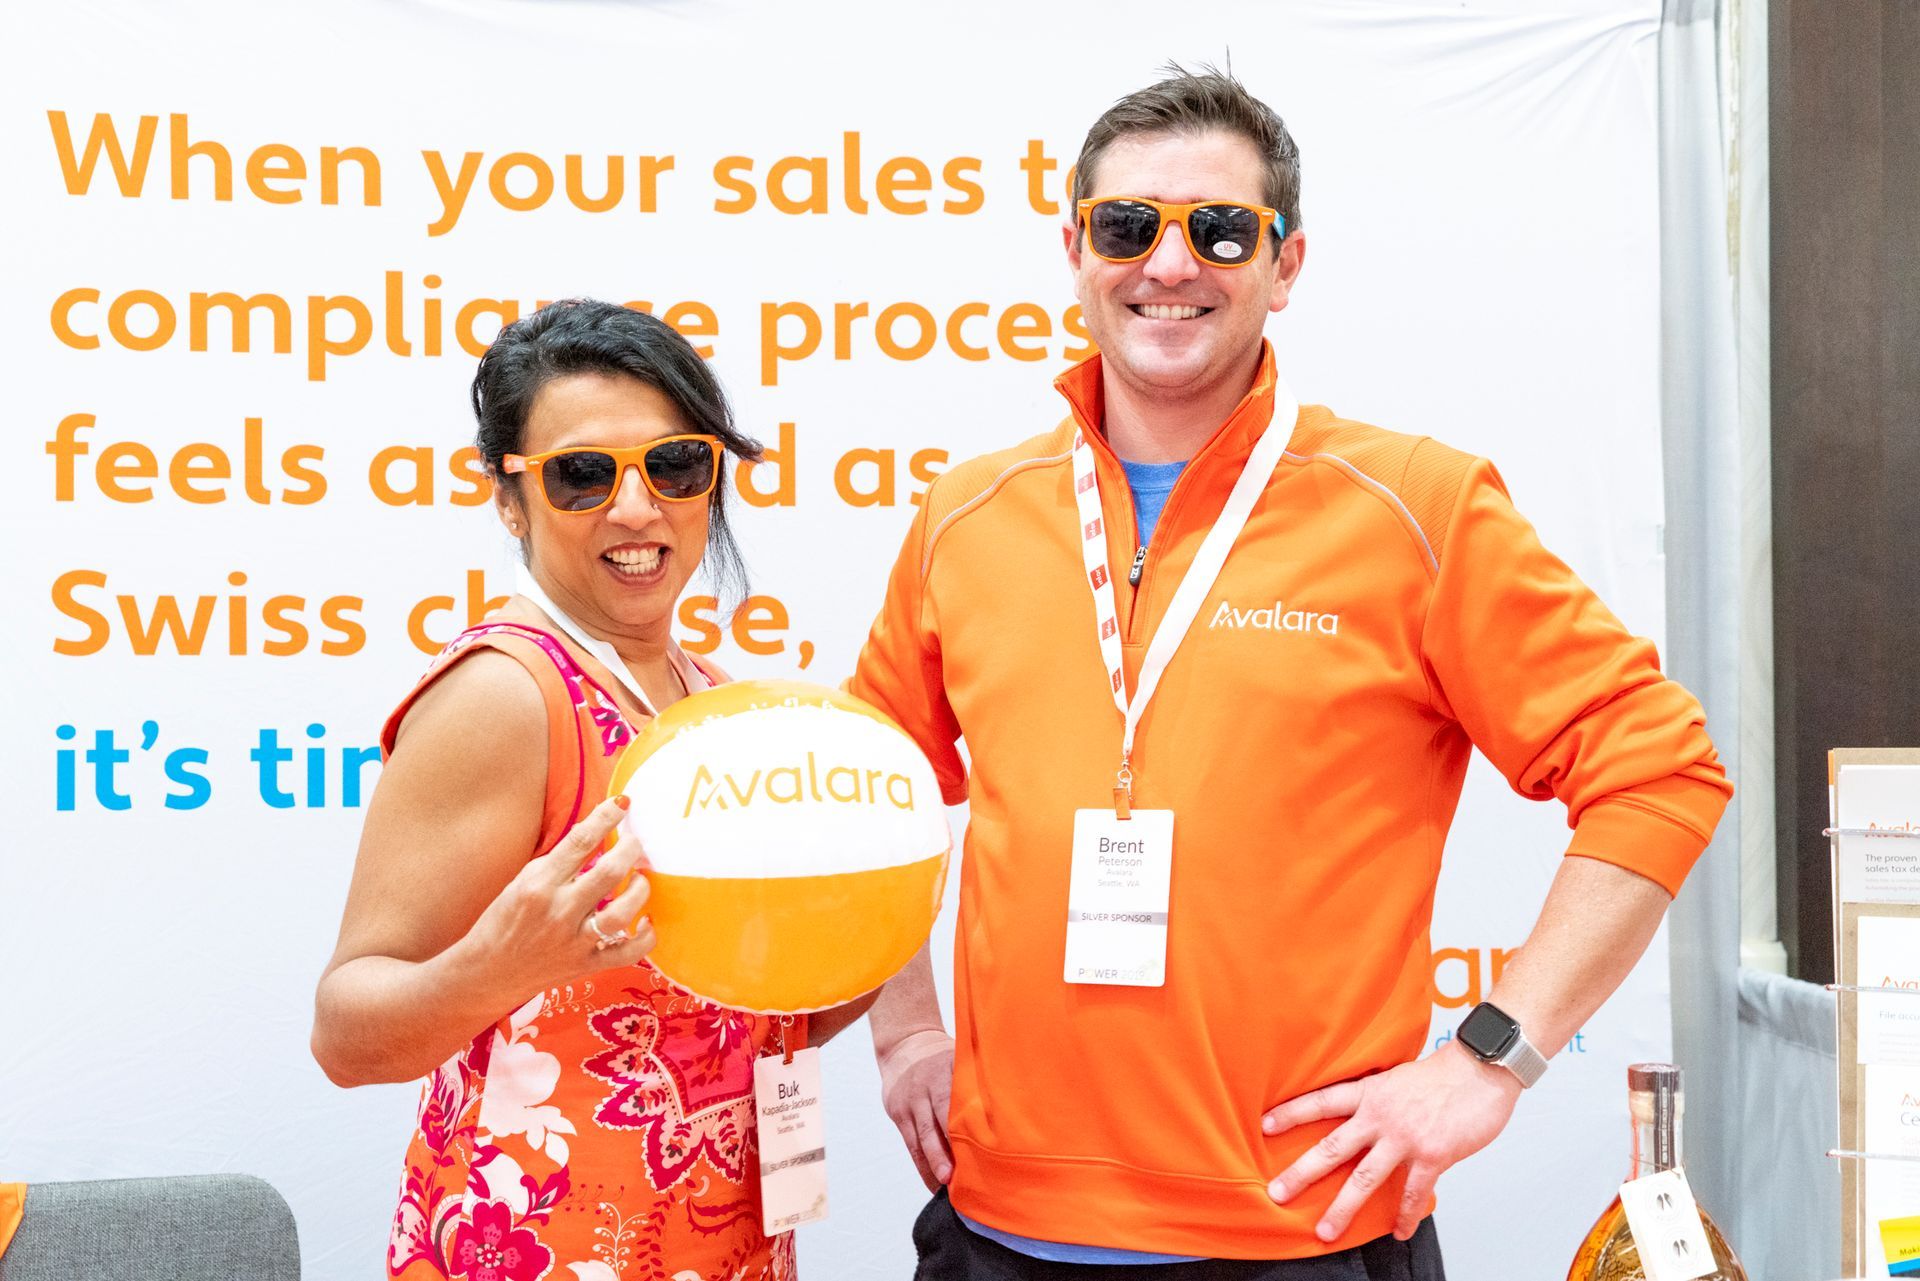 Avalara Booth featuring a woman and a man both wearing orange attire and holding a orange and white ball with 'Avalara' written on it.